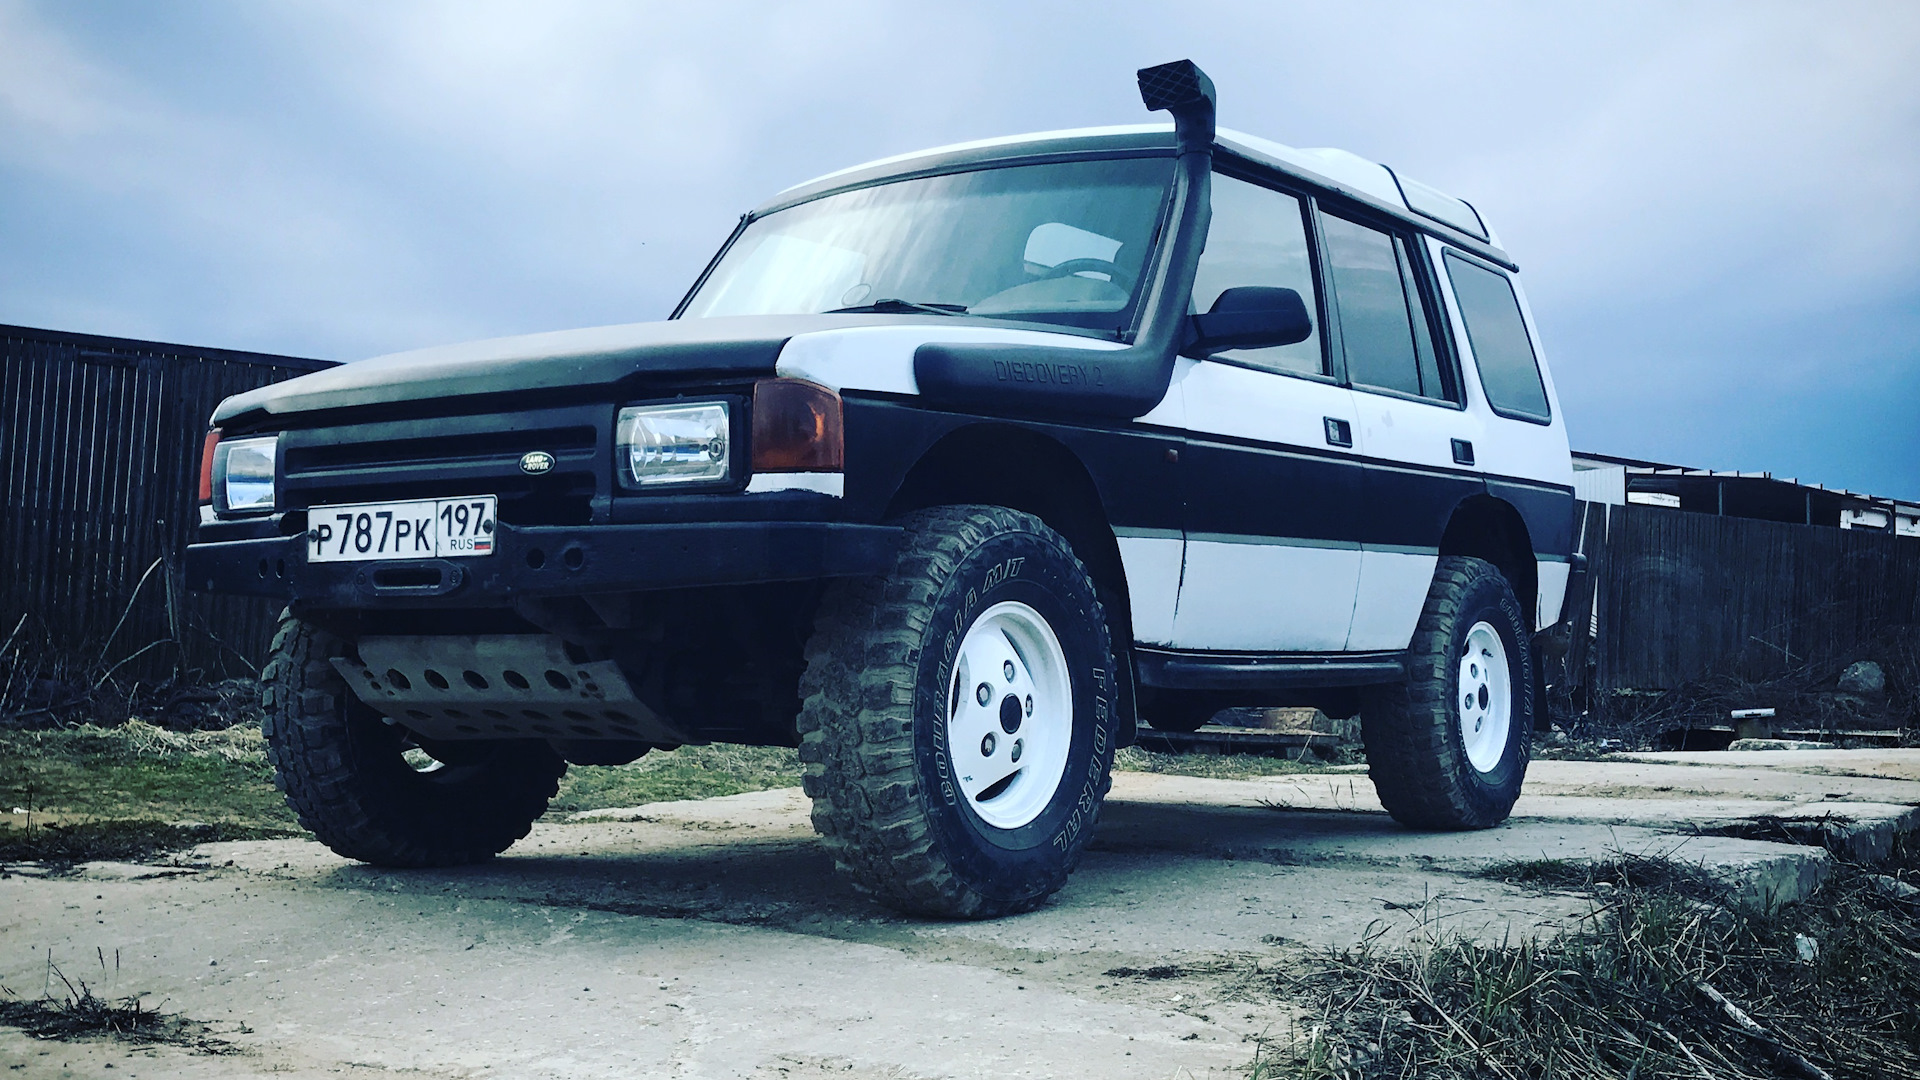 Discovery 1 8. Ленд Ровер Дискавери 1 с шноркелем. Land Rover Discovery 1995. Кузов Дискавери 1. Дискавери 1 кабриолет.